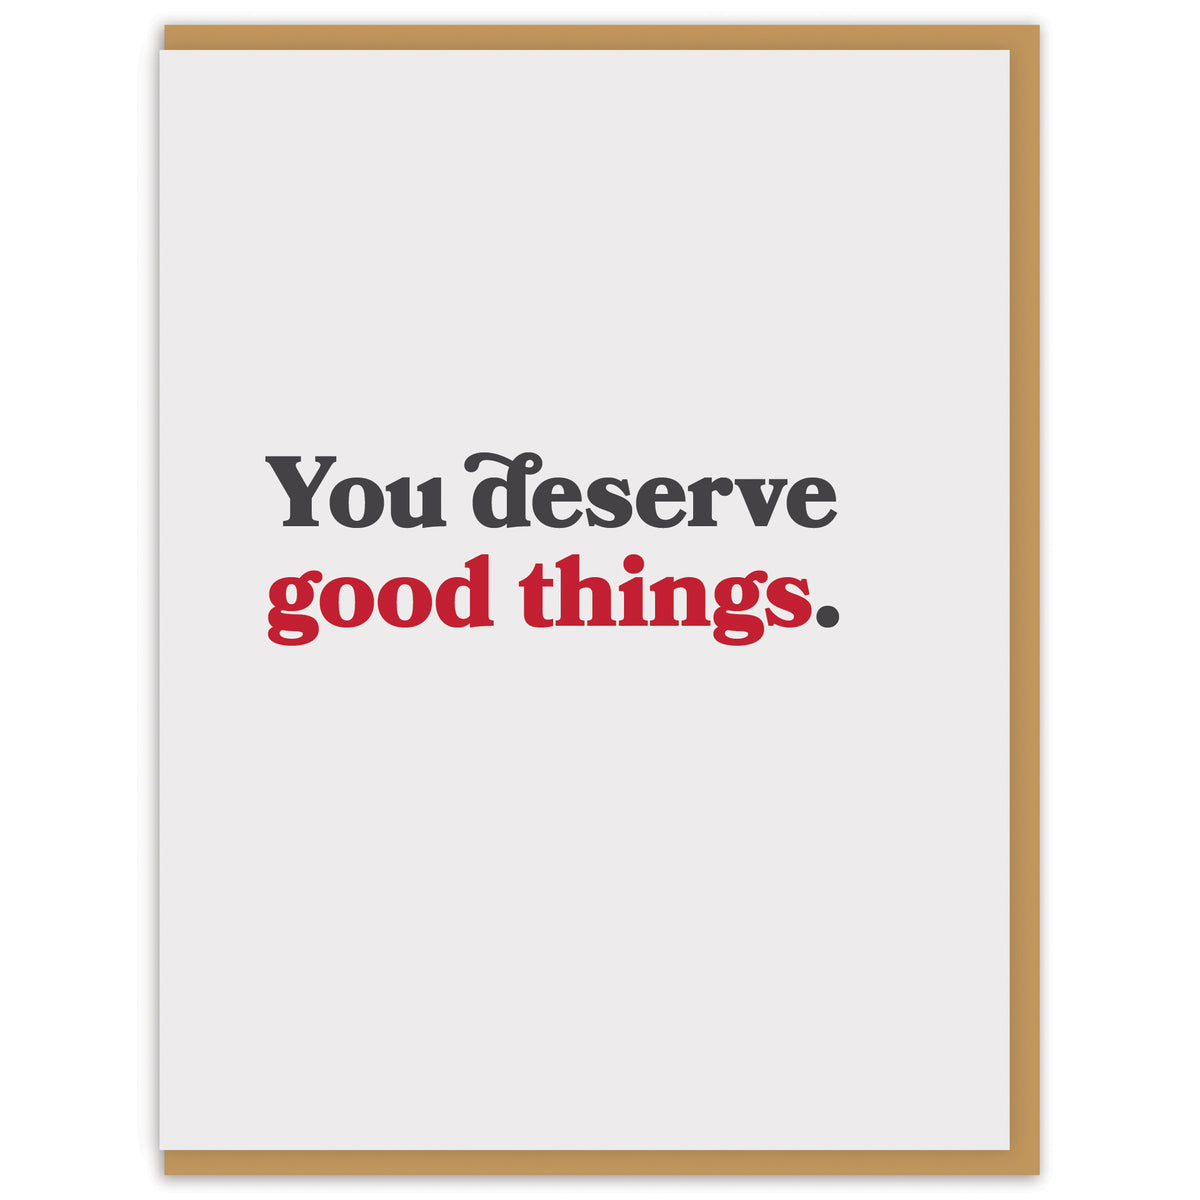 You deserve good things.